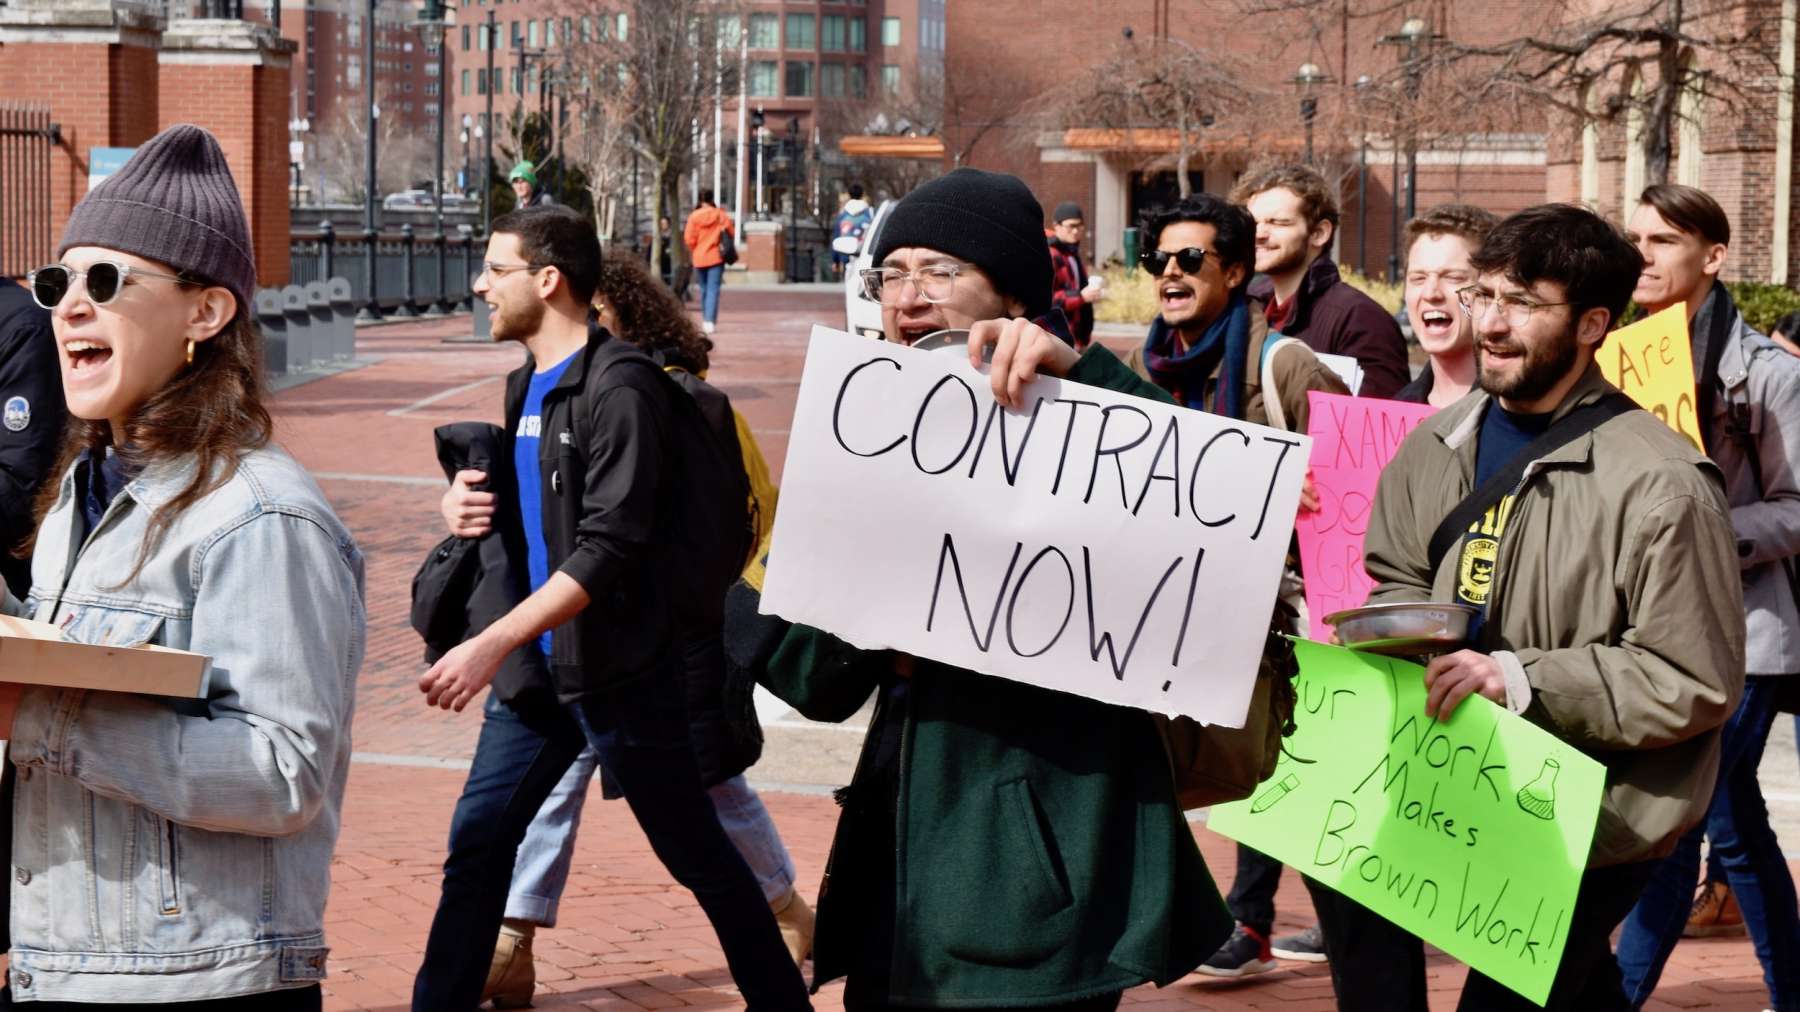 Graduate students march to pressure Brown University to final agreement on contact